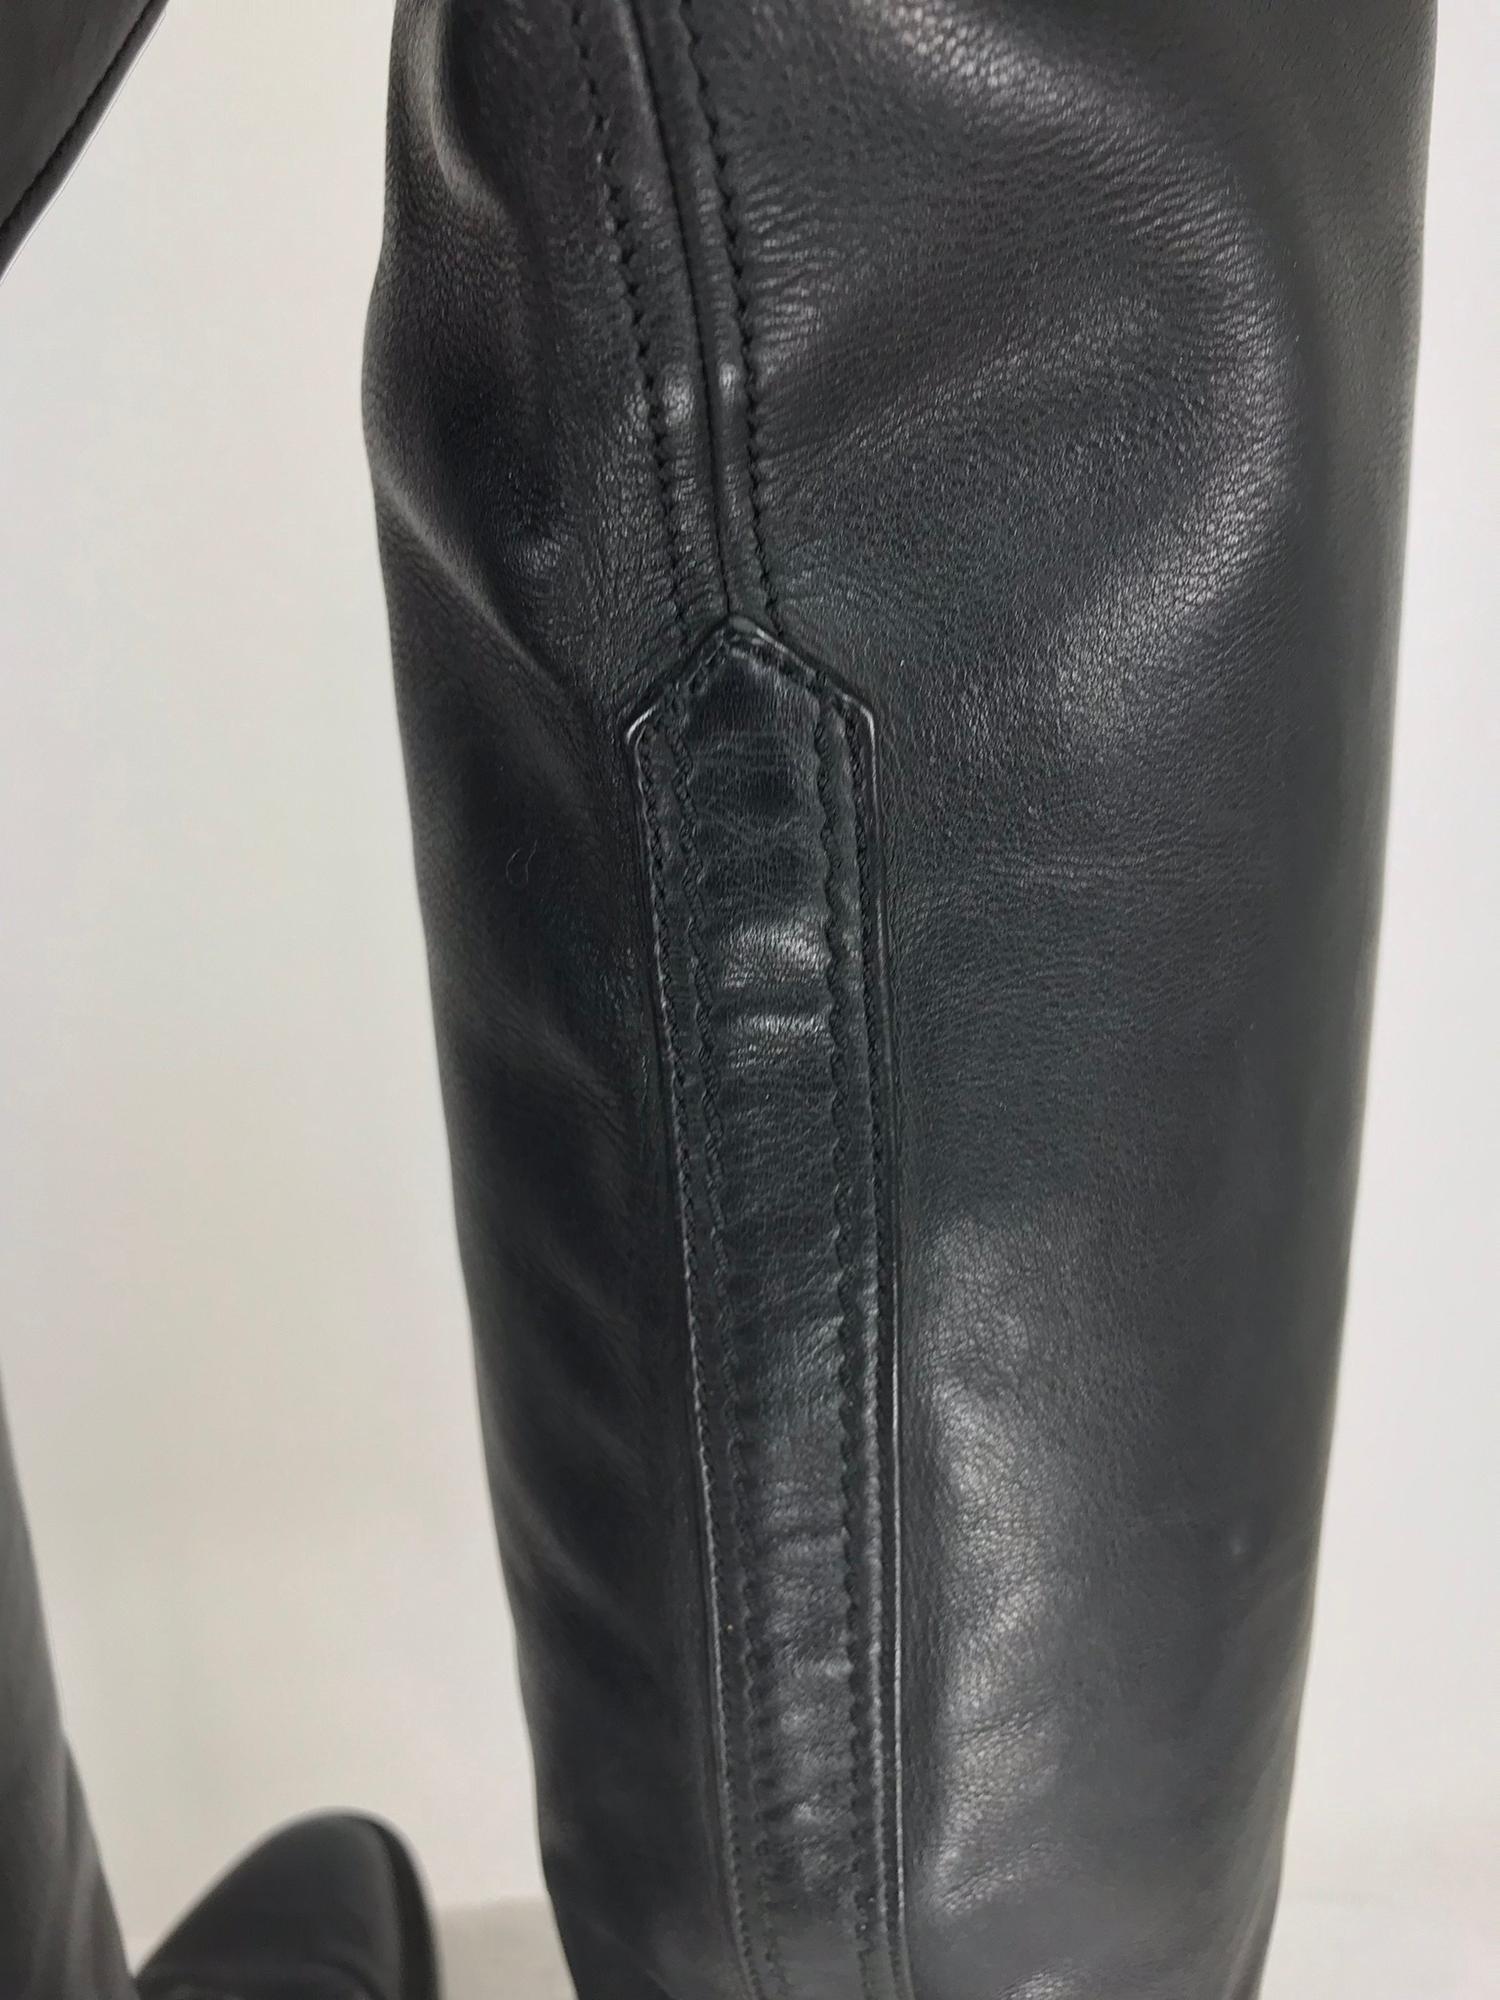 Women's Chanel Over the knee black leather riding boots Claudia Schiffer worn 1990s